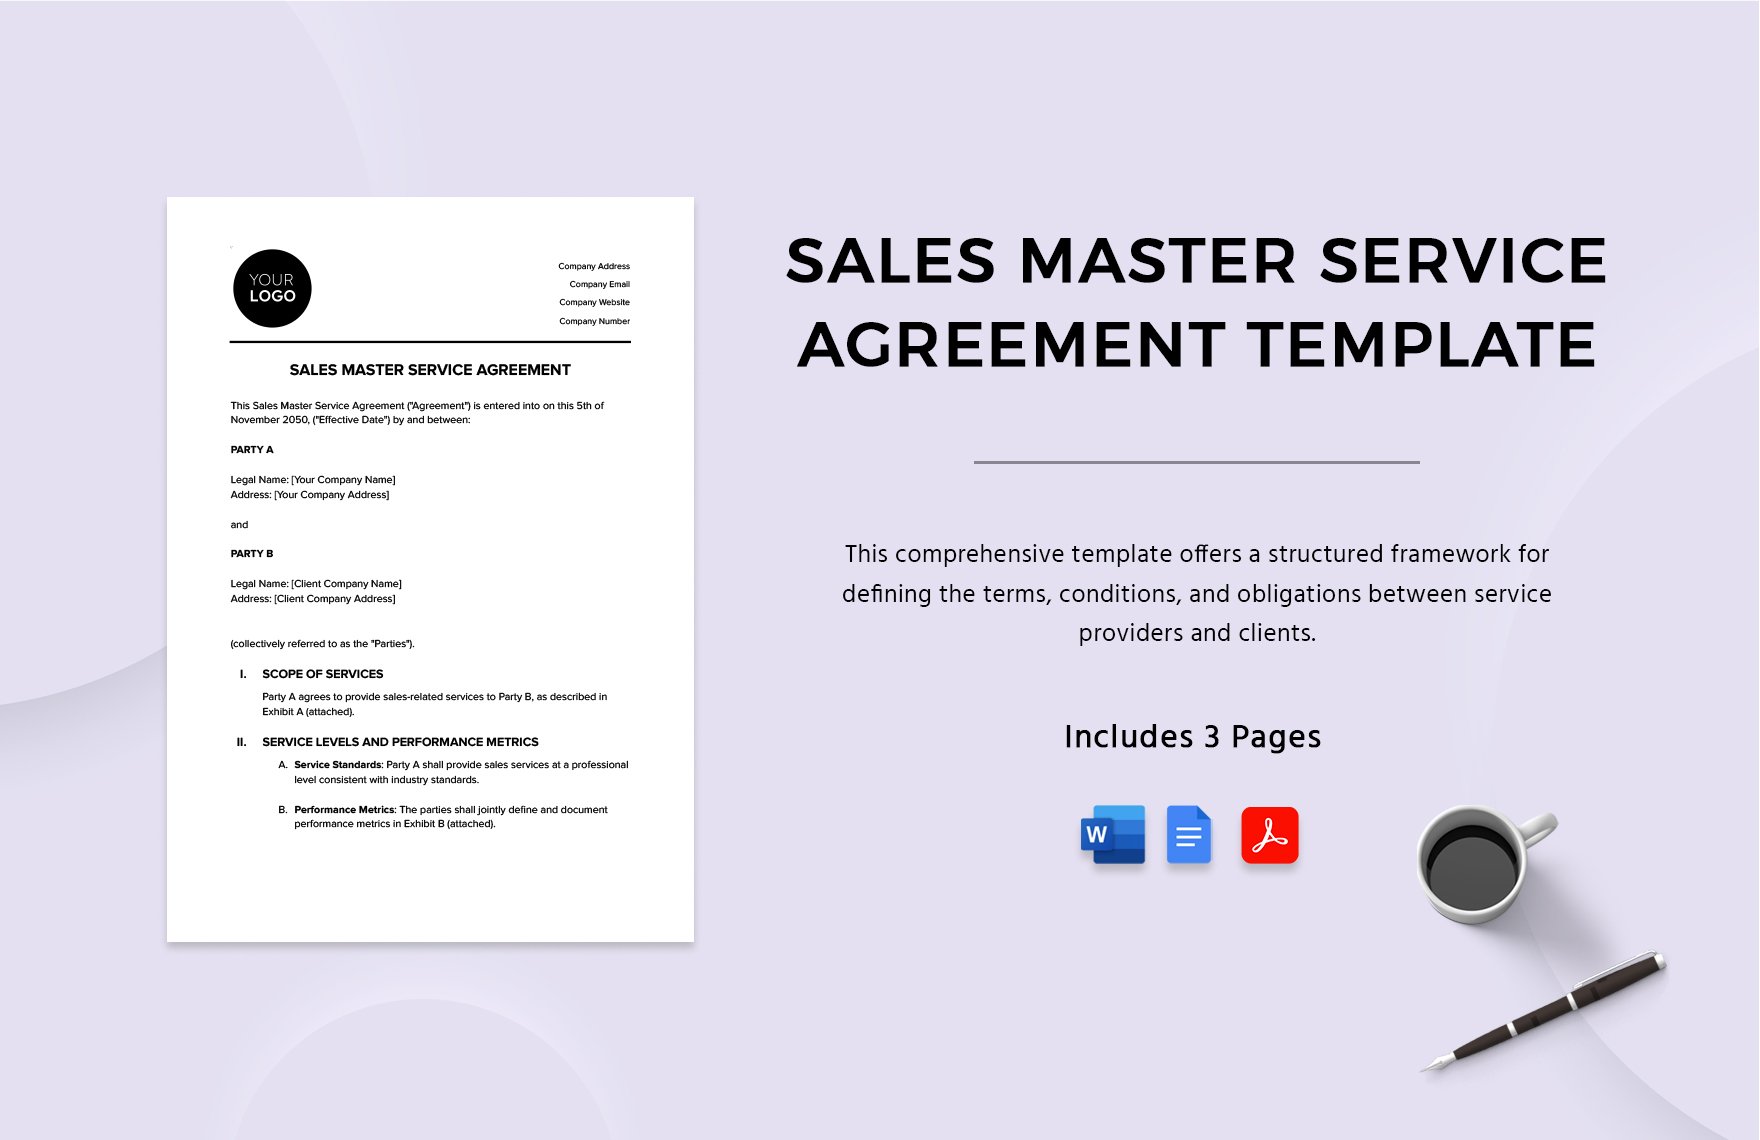 Sales Master Service Agreement Template in Word, Google Docs, PDF